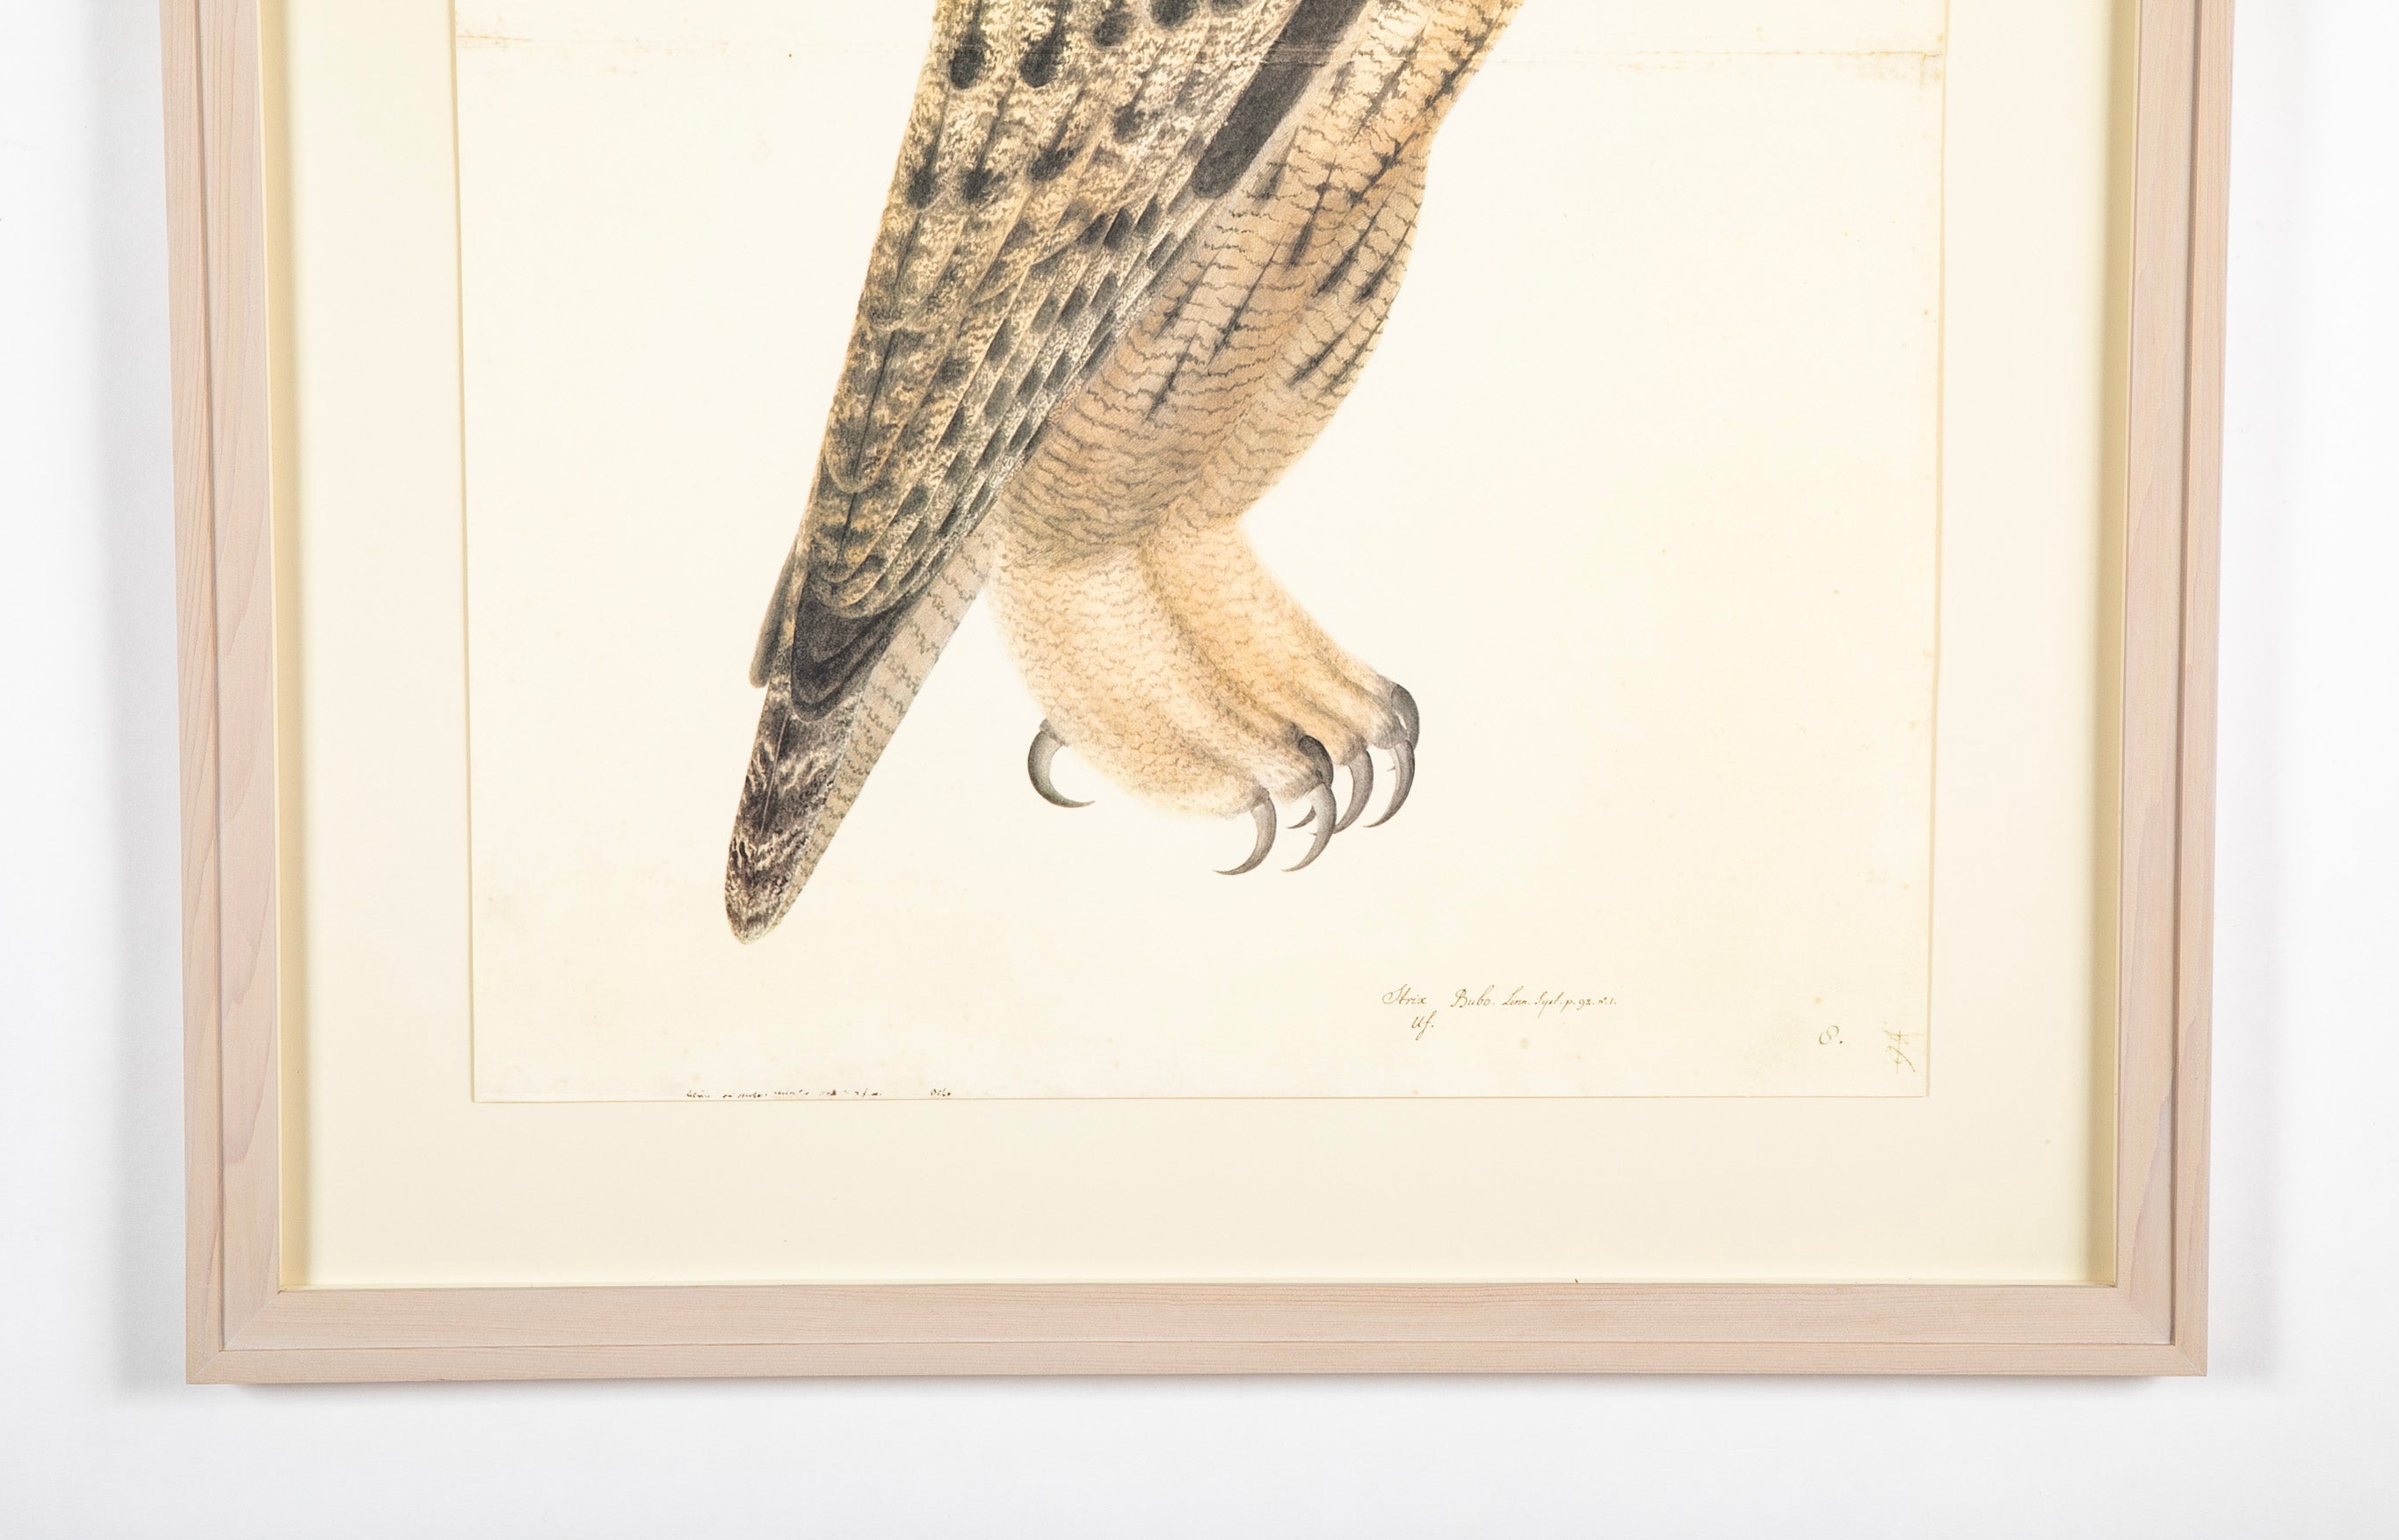 Offset Lithograph of "Brown Horned Owl"from the "The Great Bird Book" by Olaf Rudbeck The Younger (1660-1740)